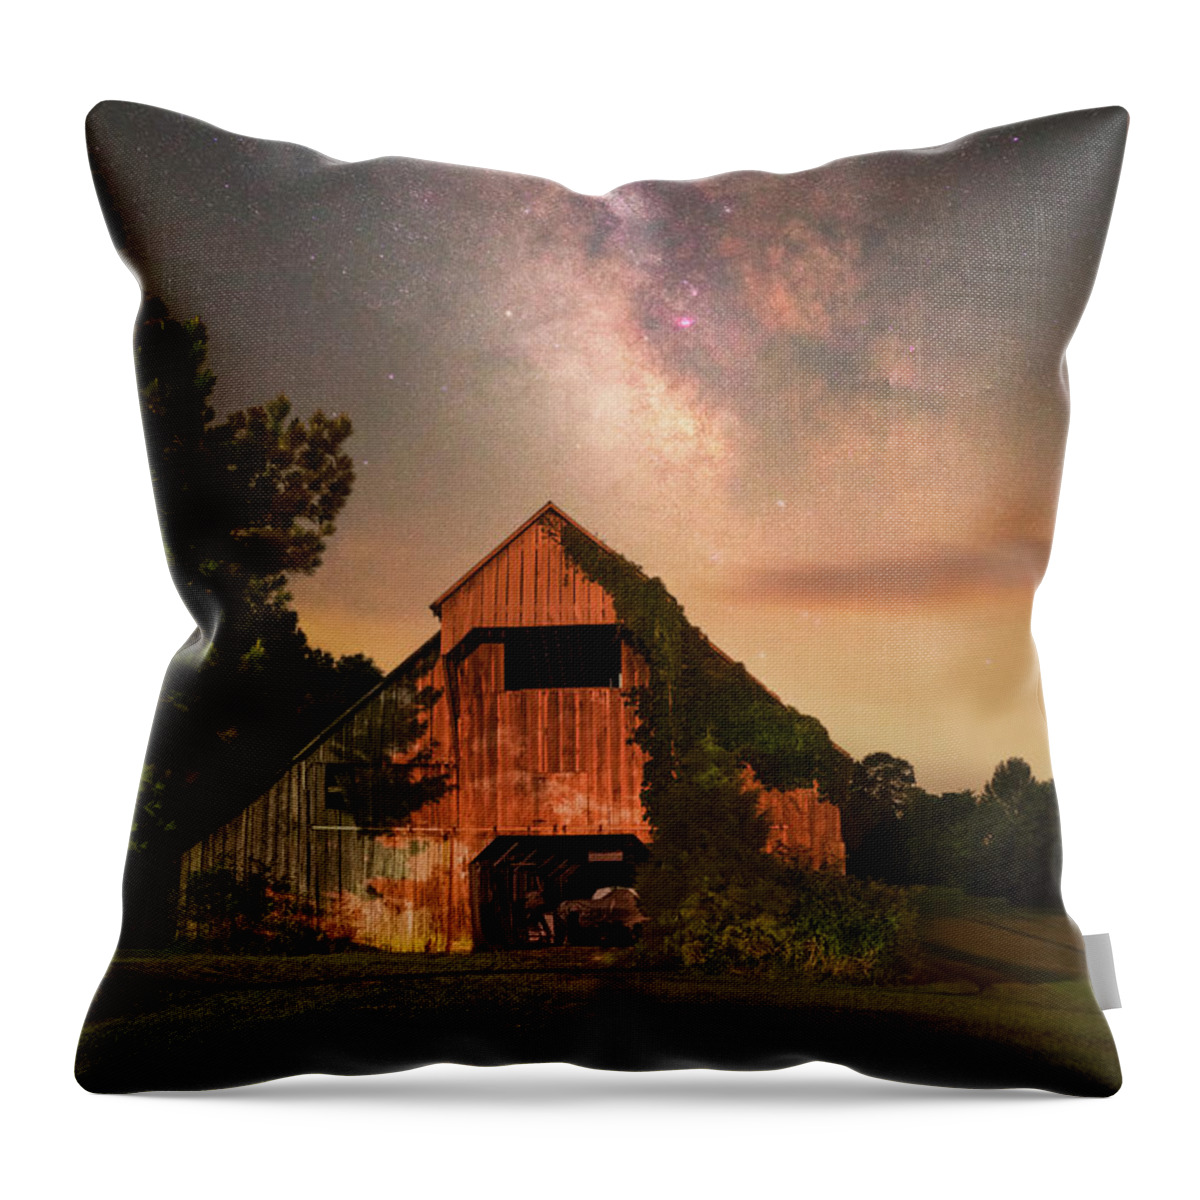 Nightscape Throw Pillow featuring the photograph Pope County by Grant Twiss